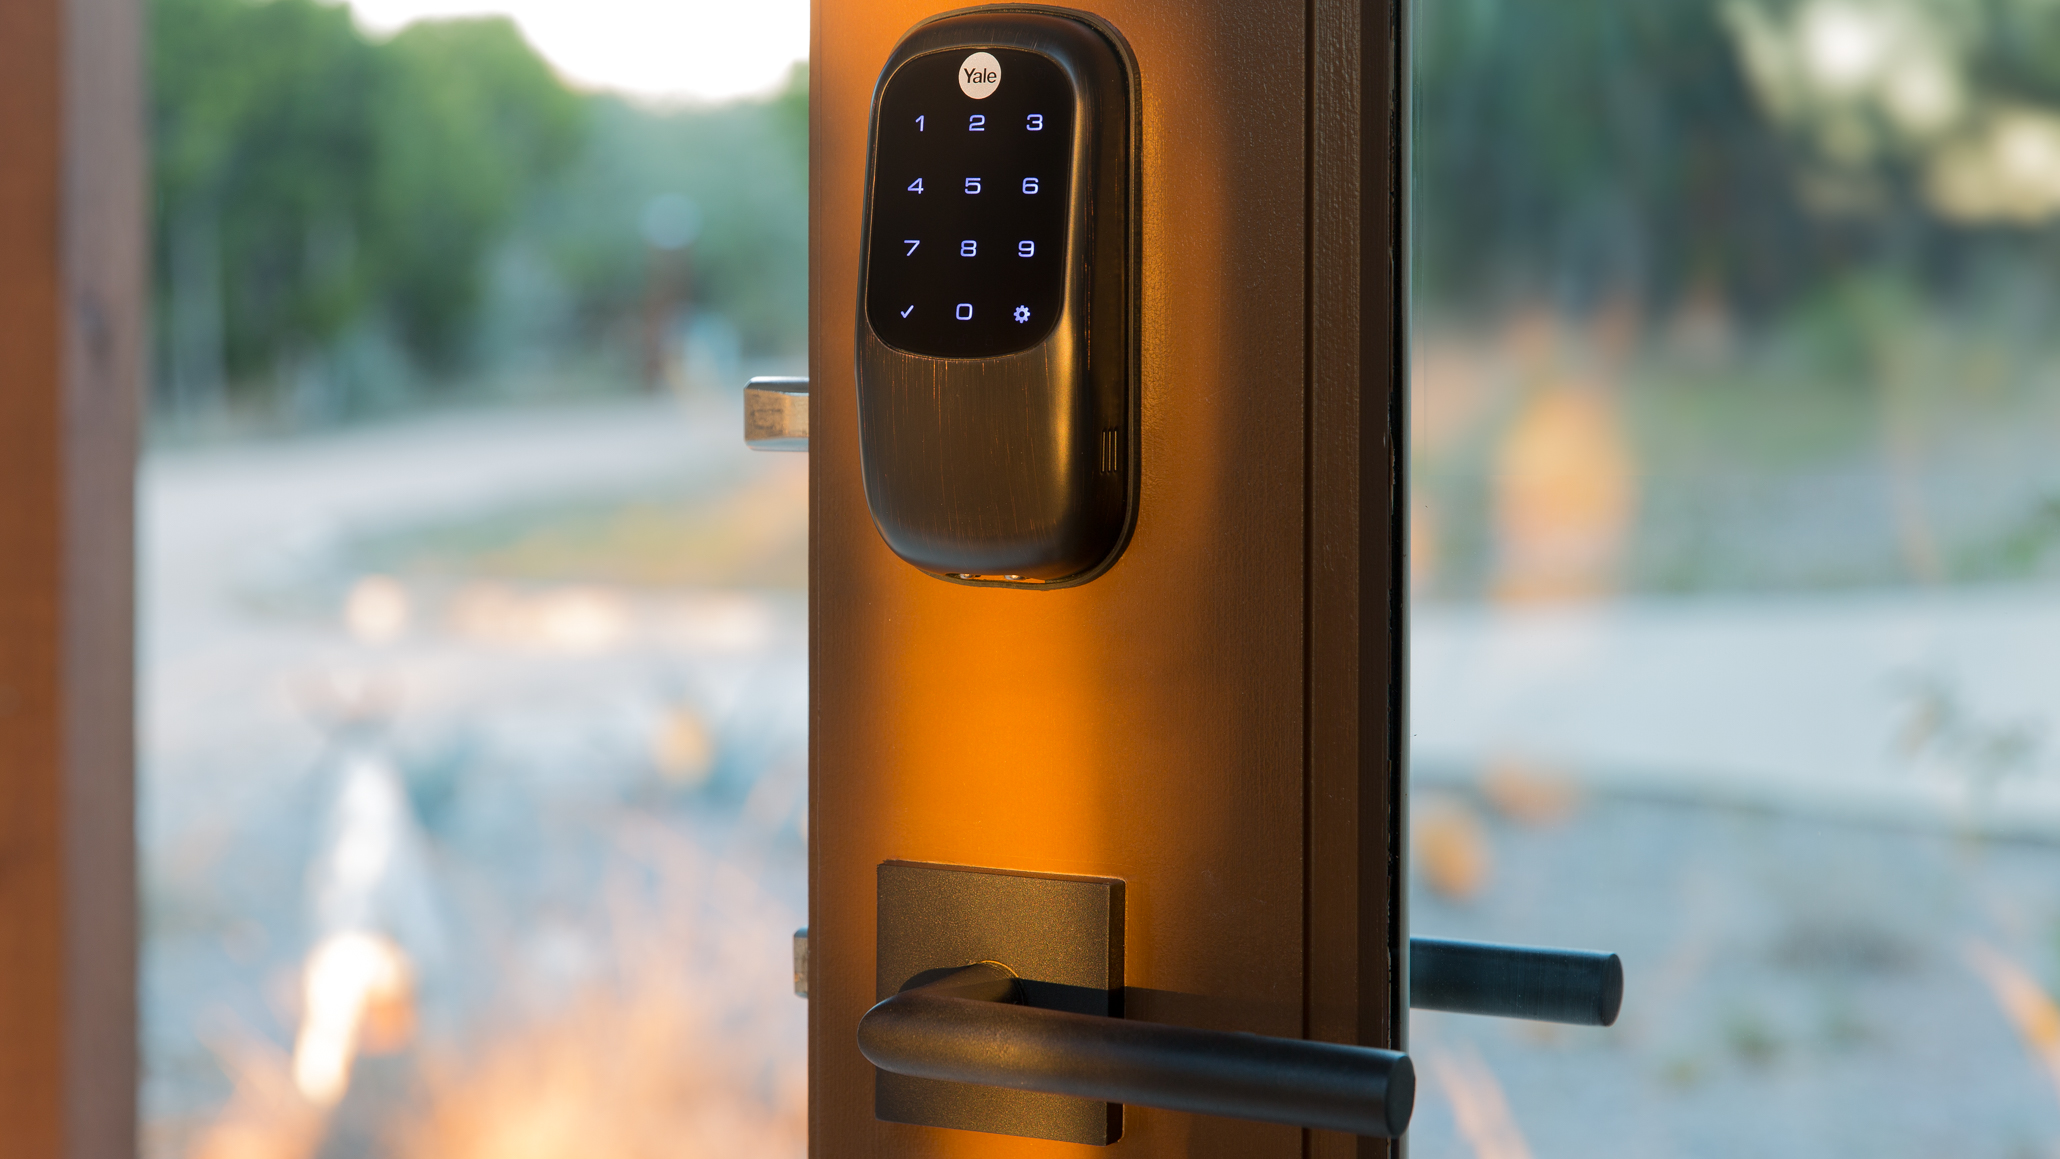 Smart door locks combine safety with convenience, and are a popular place to start with upgrading your home to a smart home. This Yale Assure lock is keyless, and offers shareable digital keys, a touchscreen for PIN code entry, and integration with many home automation and security systems. Image: Digitized House Media.